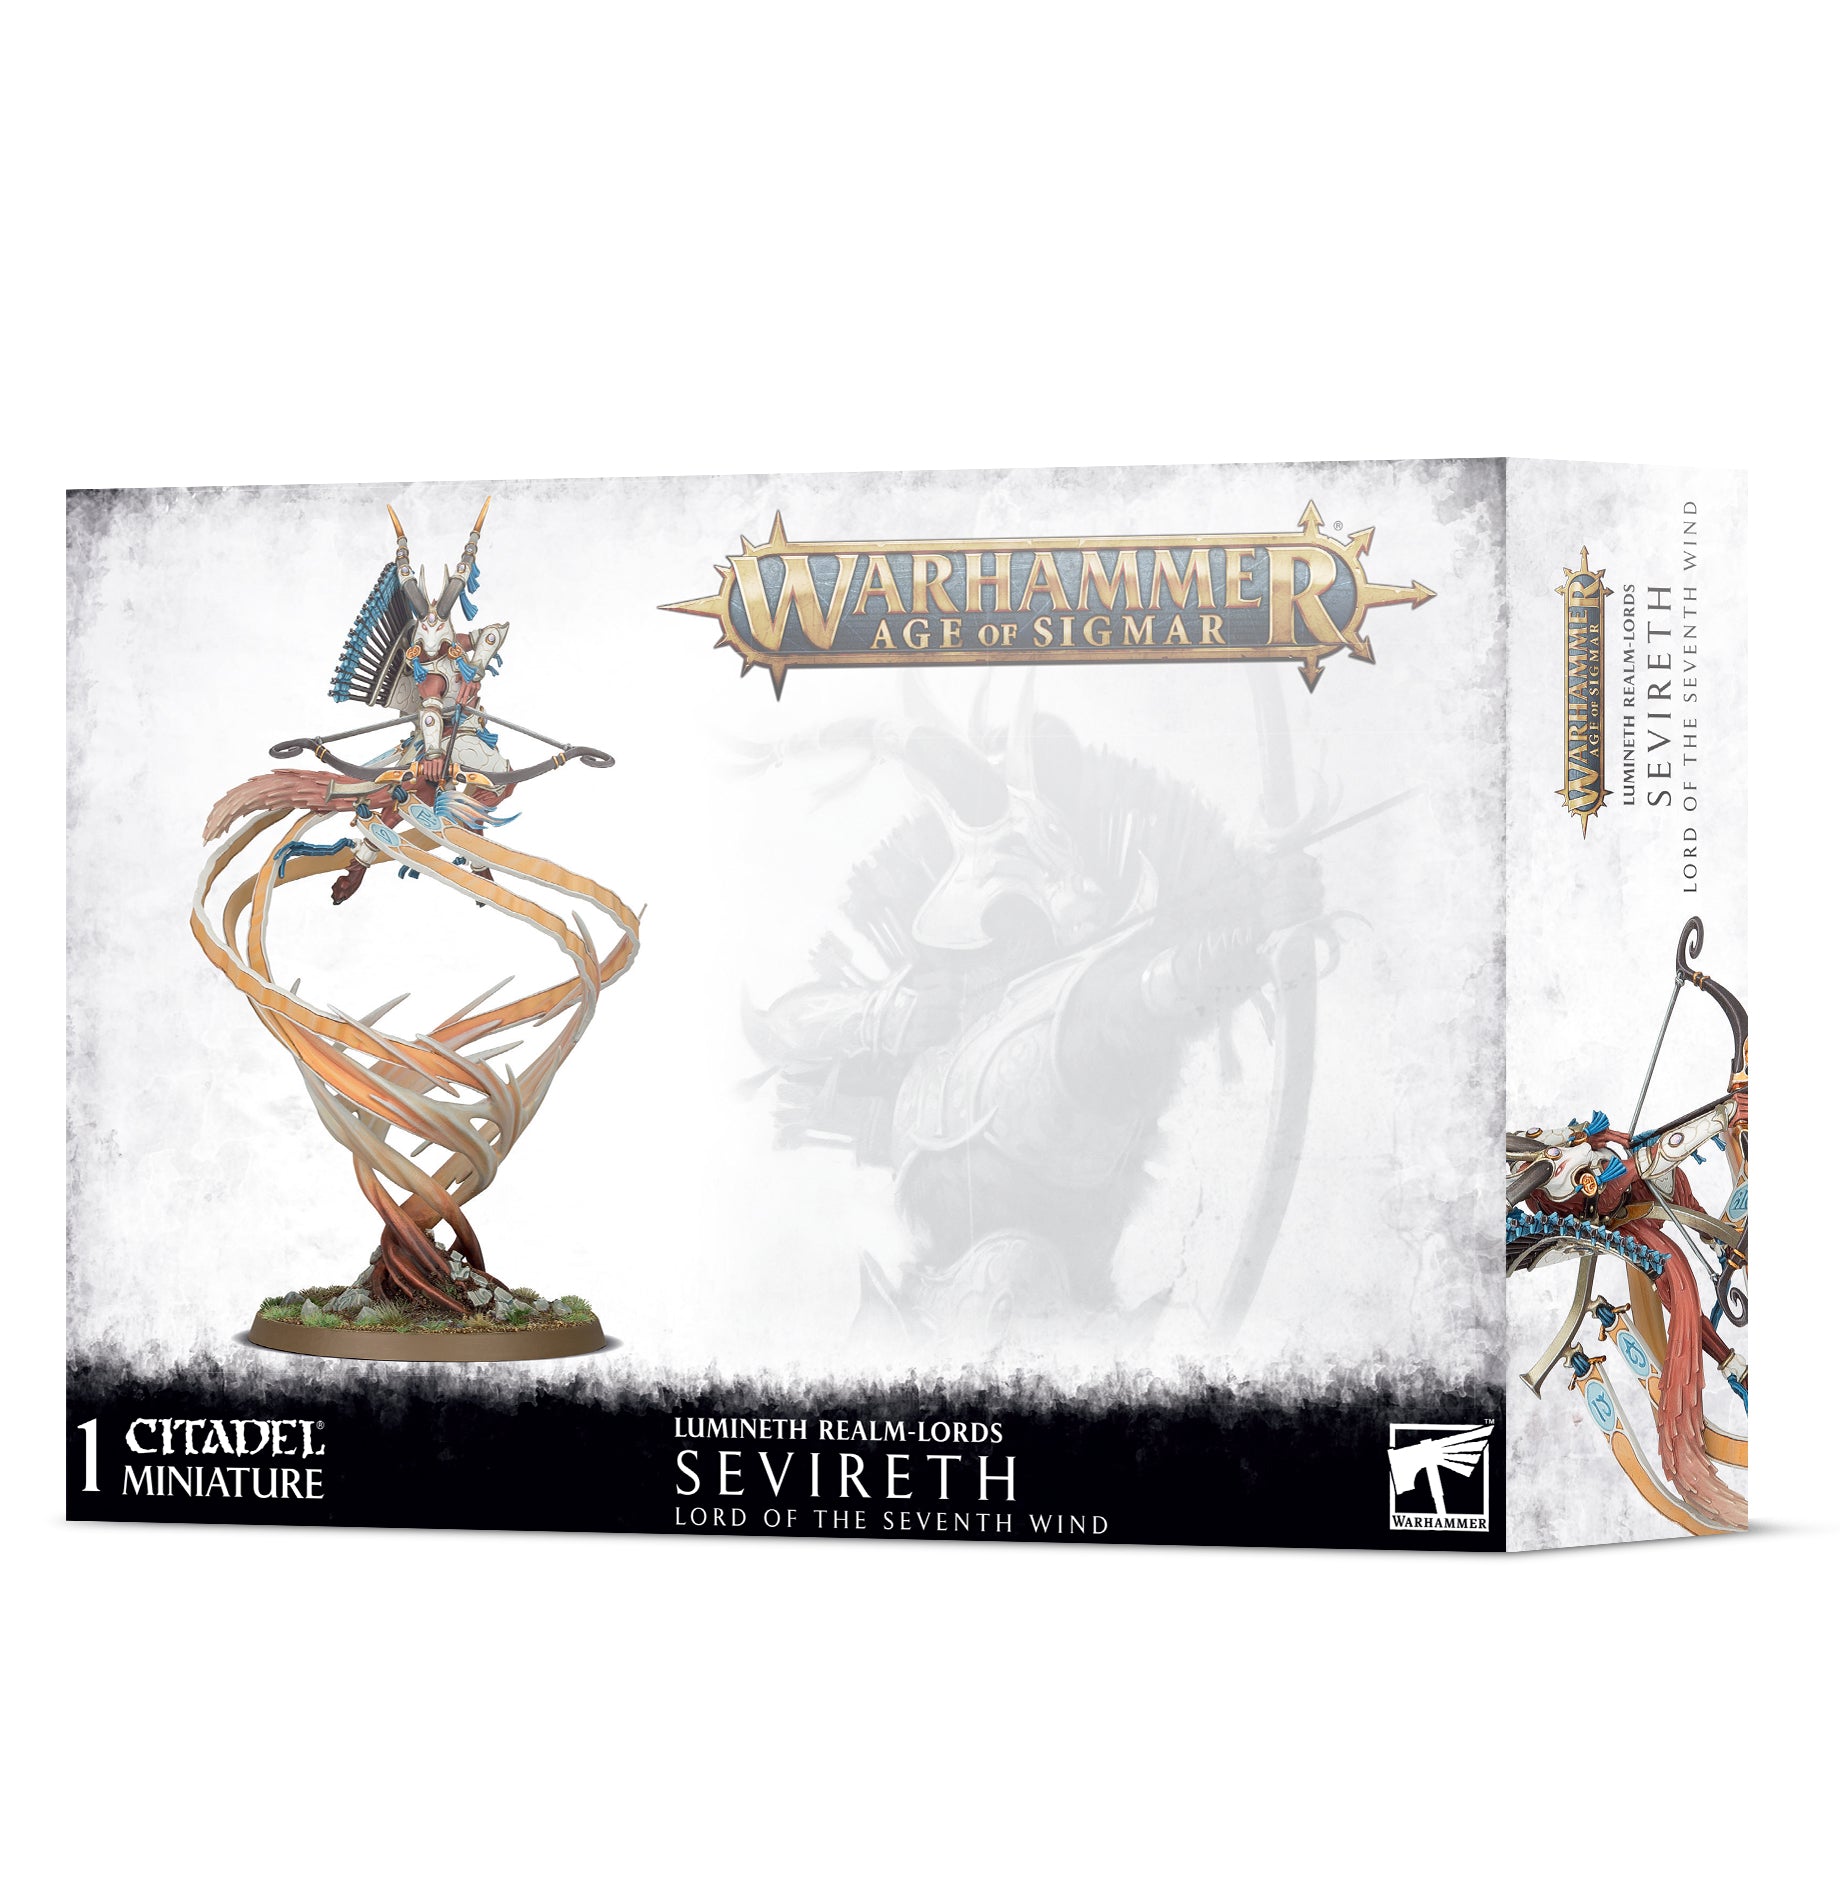 Sevireth, Lord of the Seventh Wind - Lumineth Realm-Lords - Game On